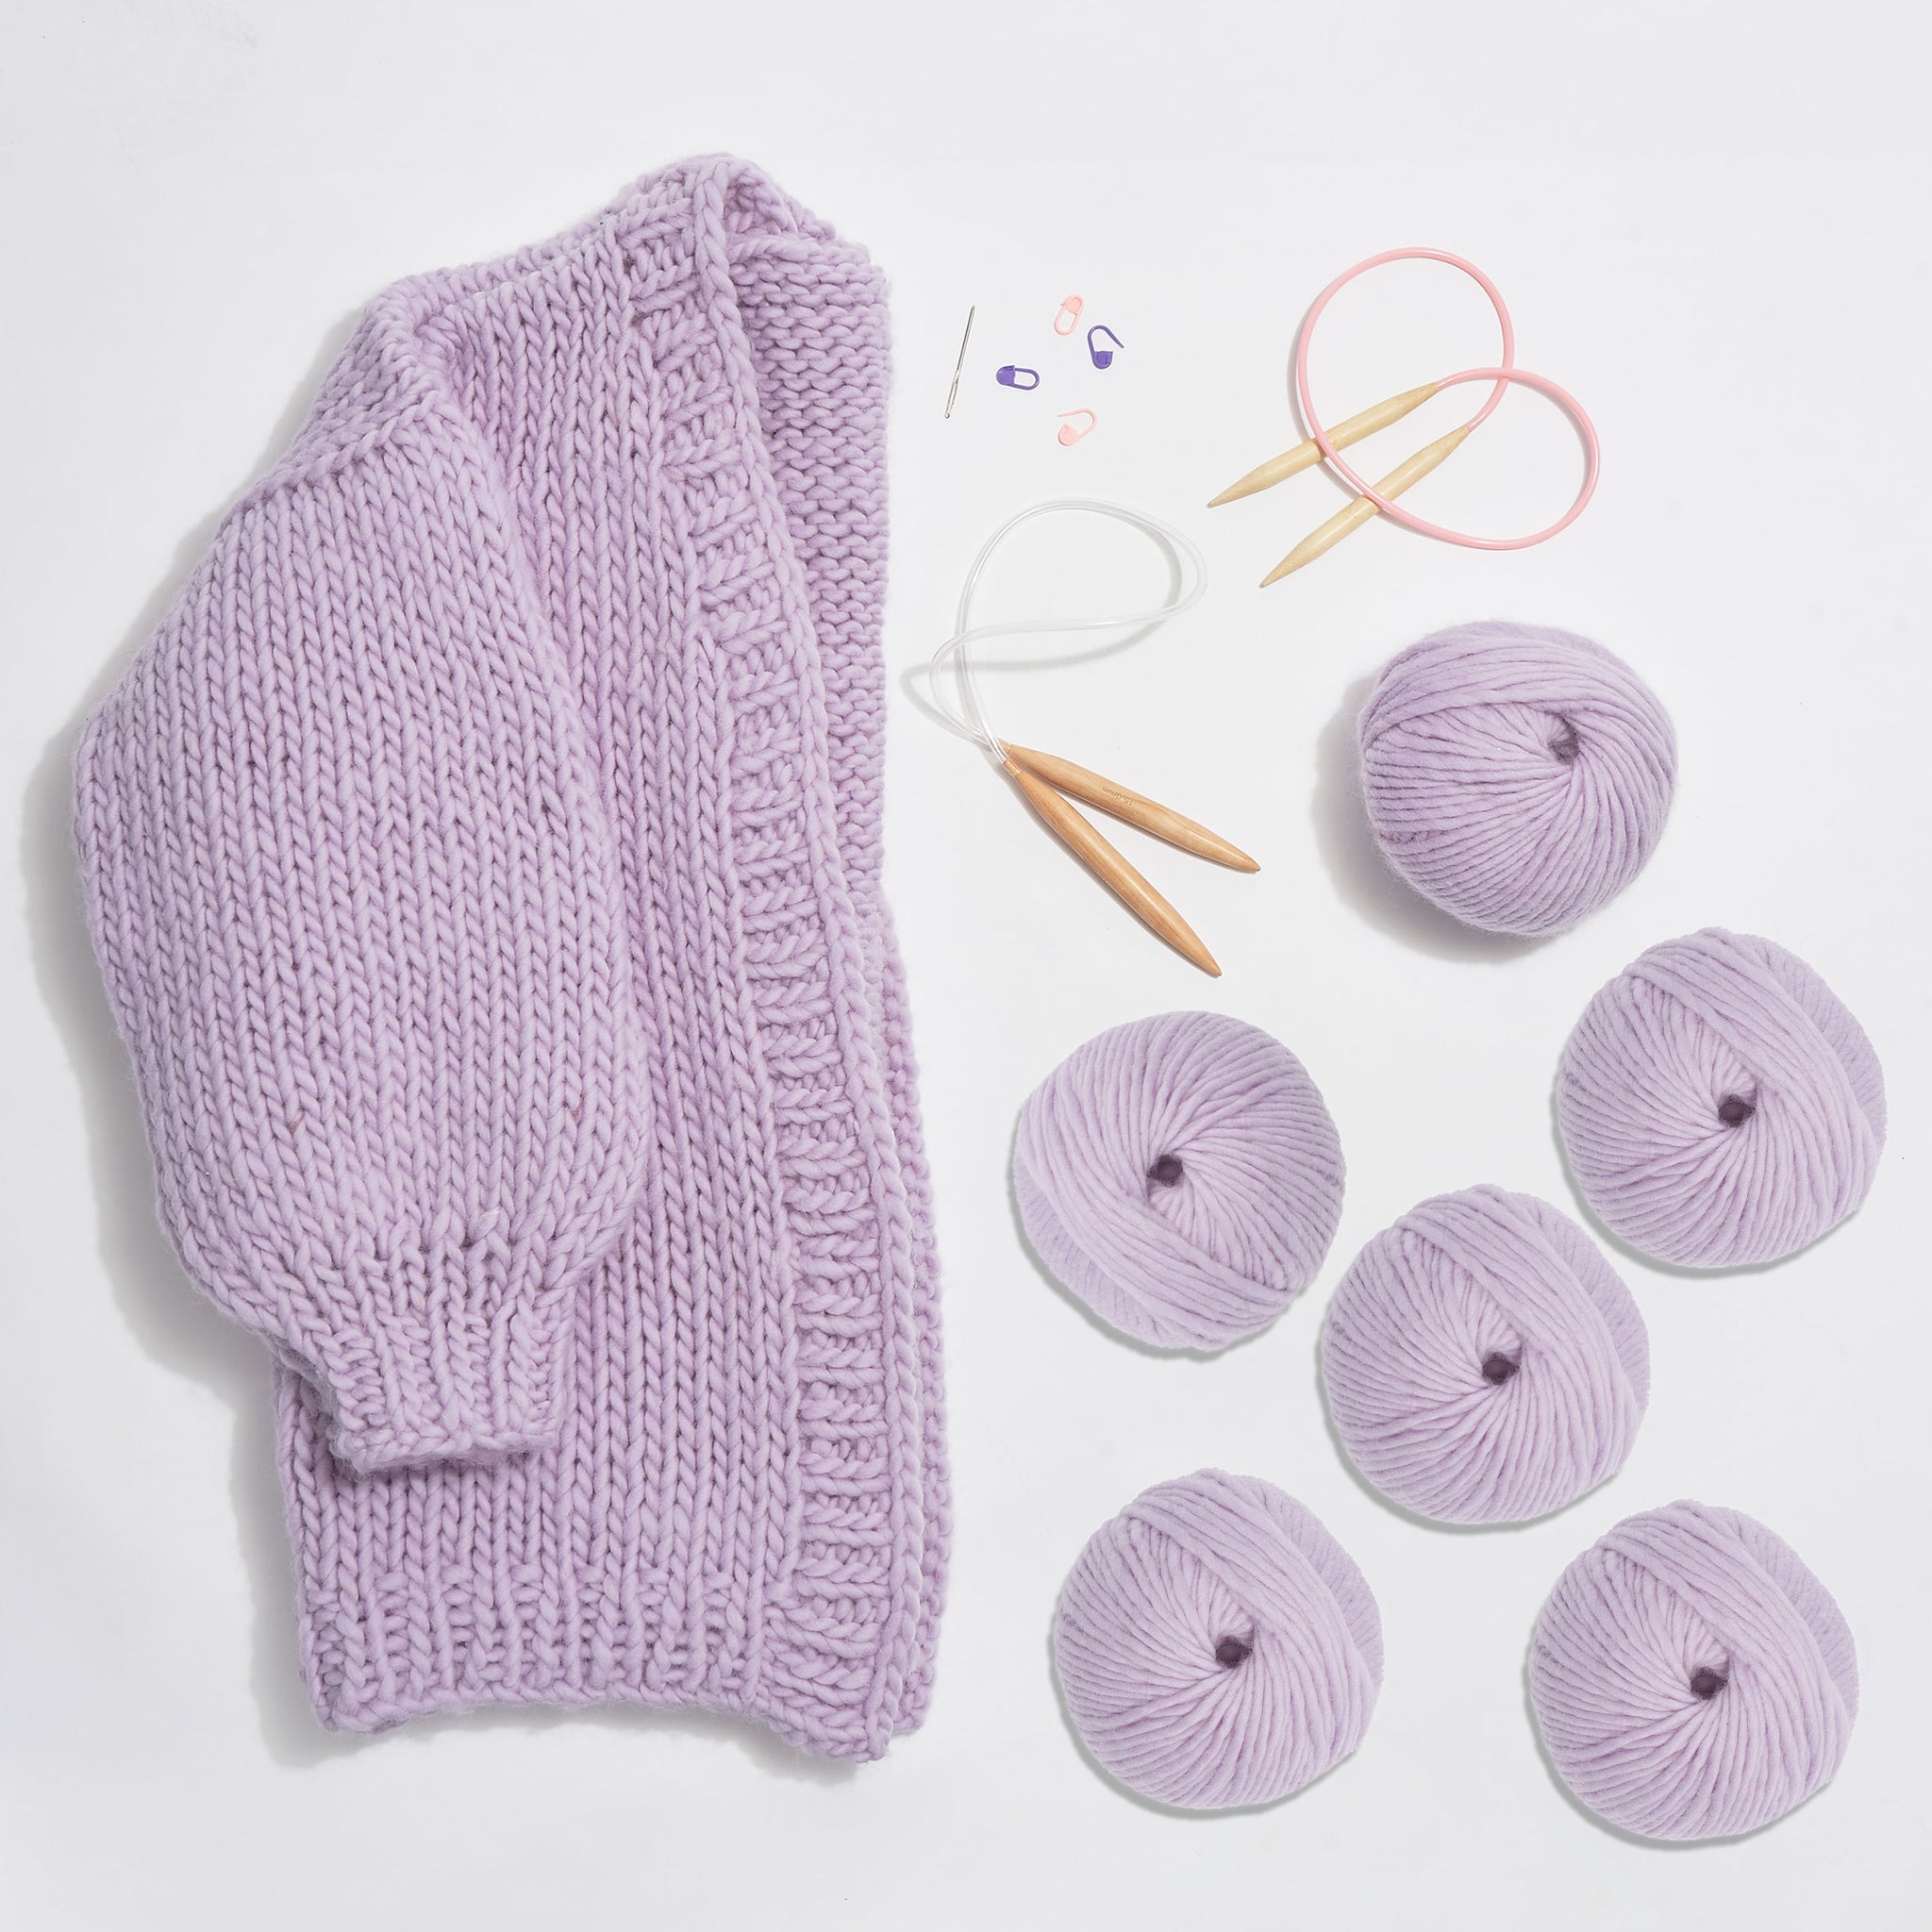 Knitting Kit- The Lucy Cardi